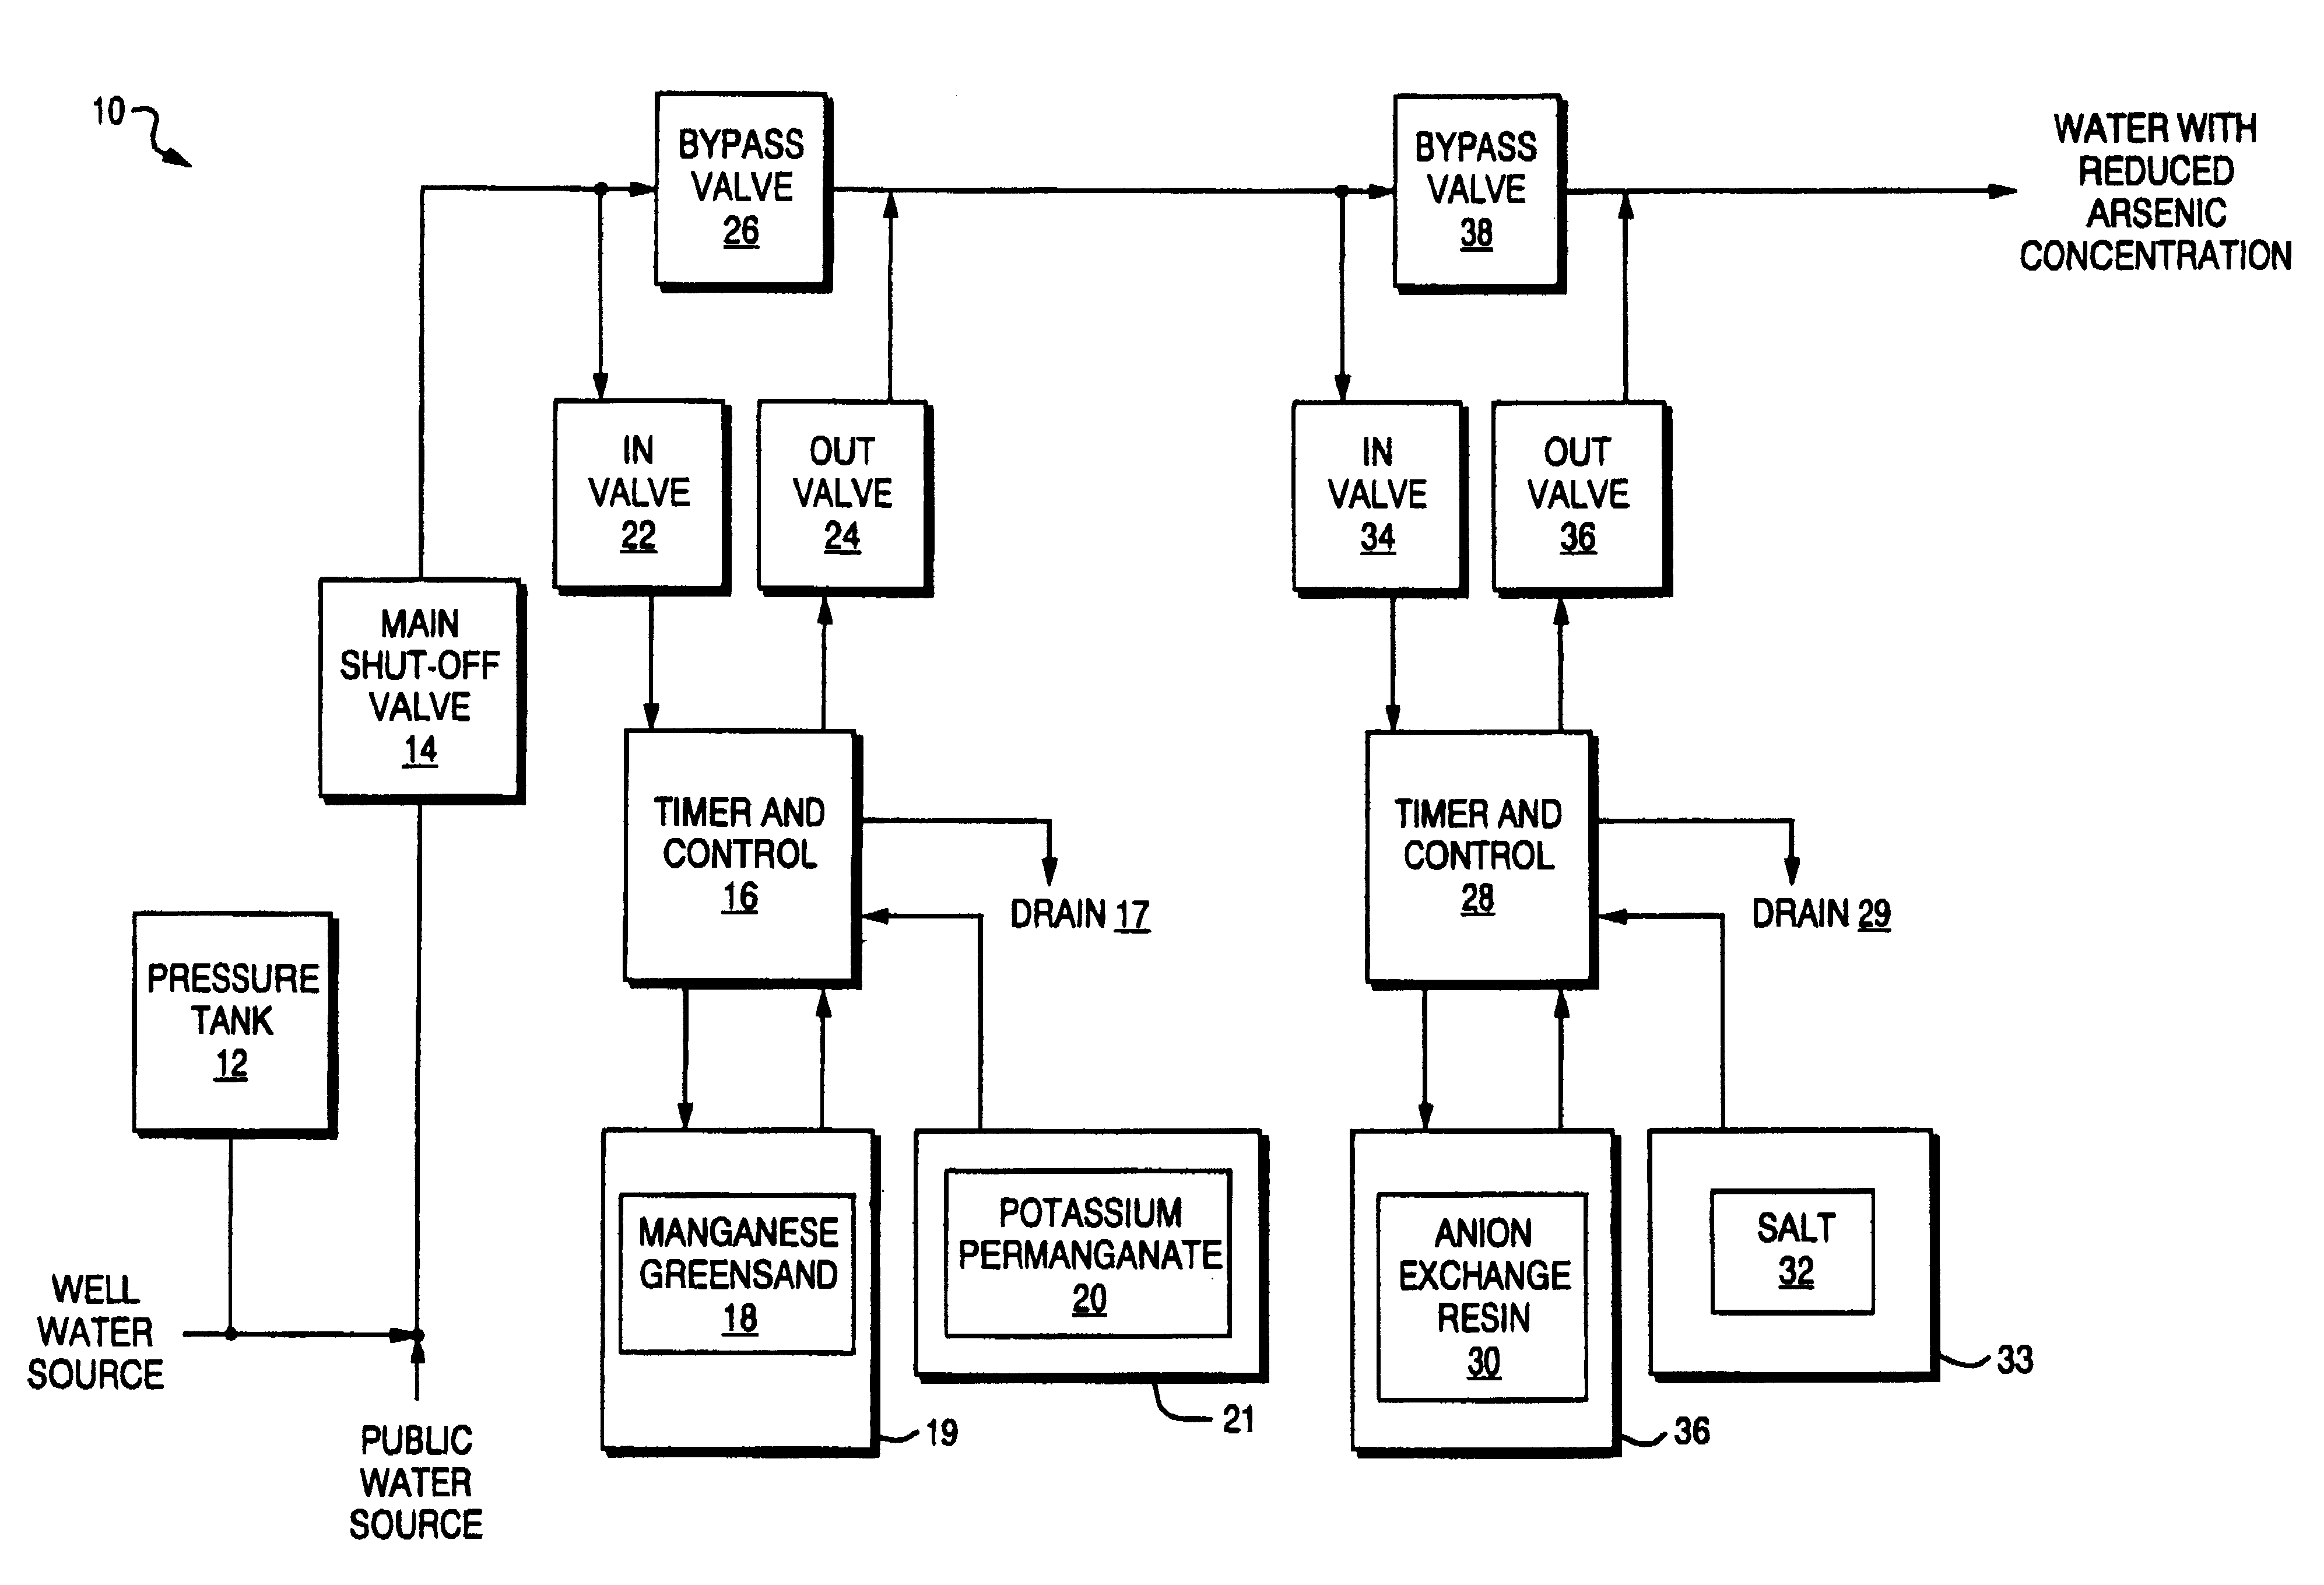 Method and apparatus for the removal of arsenic from water